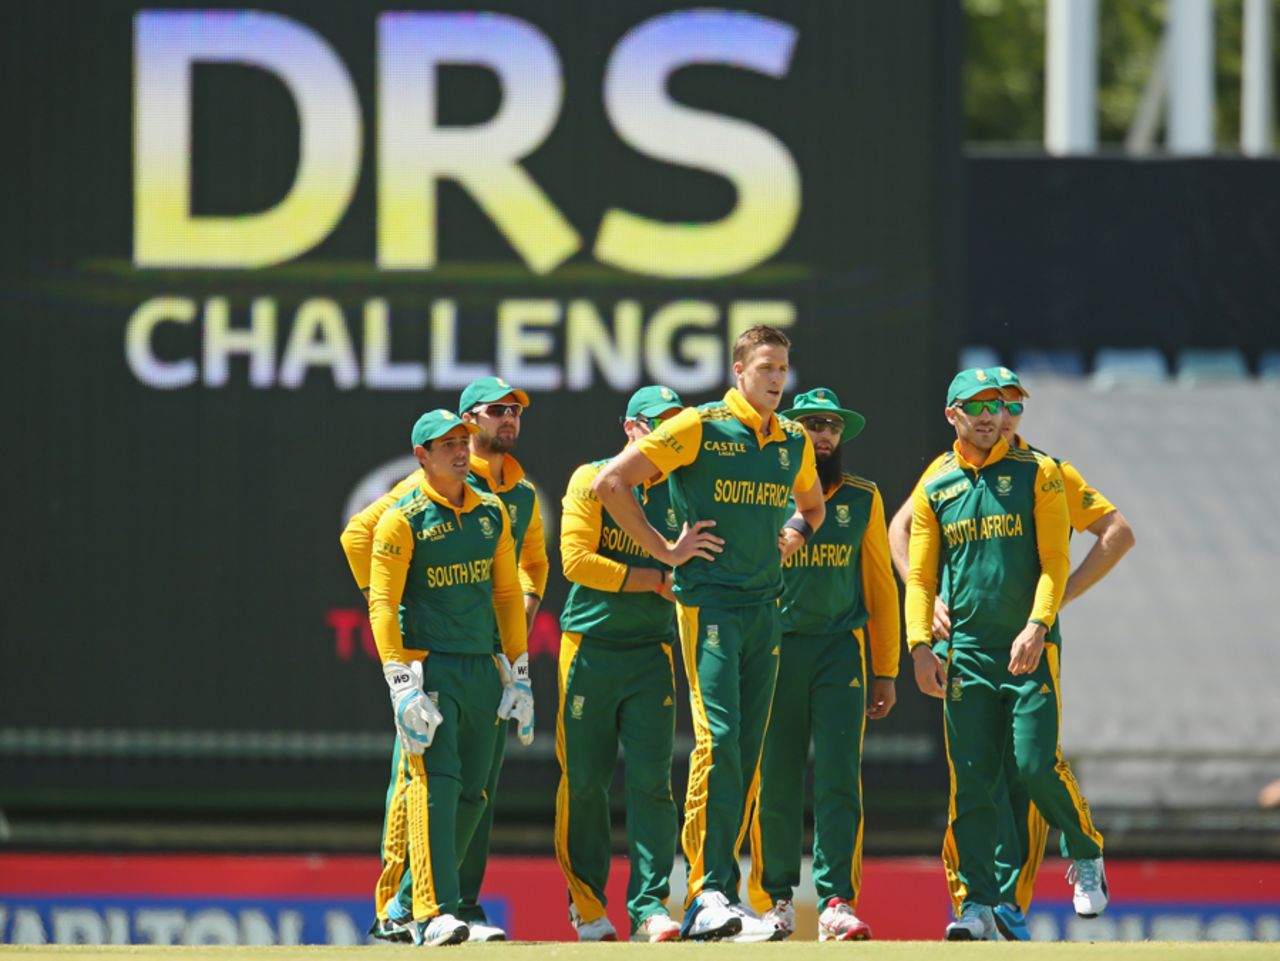 Morne Morkel had a couple of decisions reversed in his favour on review, Australia v South Africa, 2nd ODI, Perth, November 16, 2014